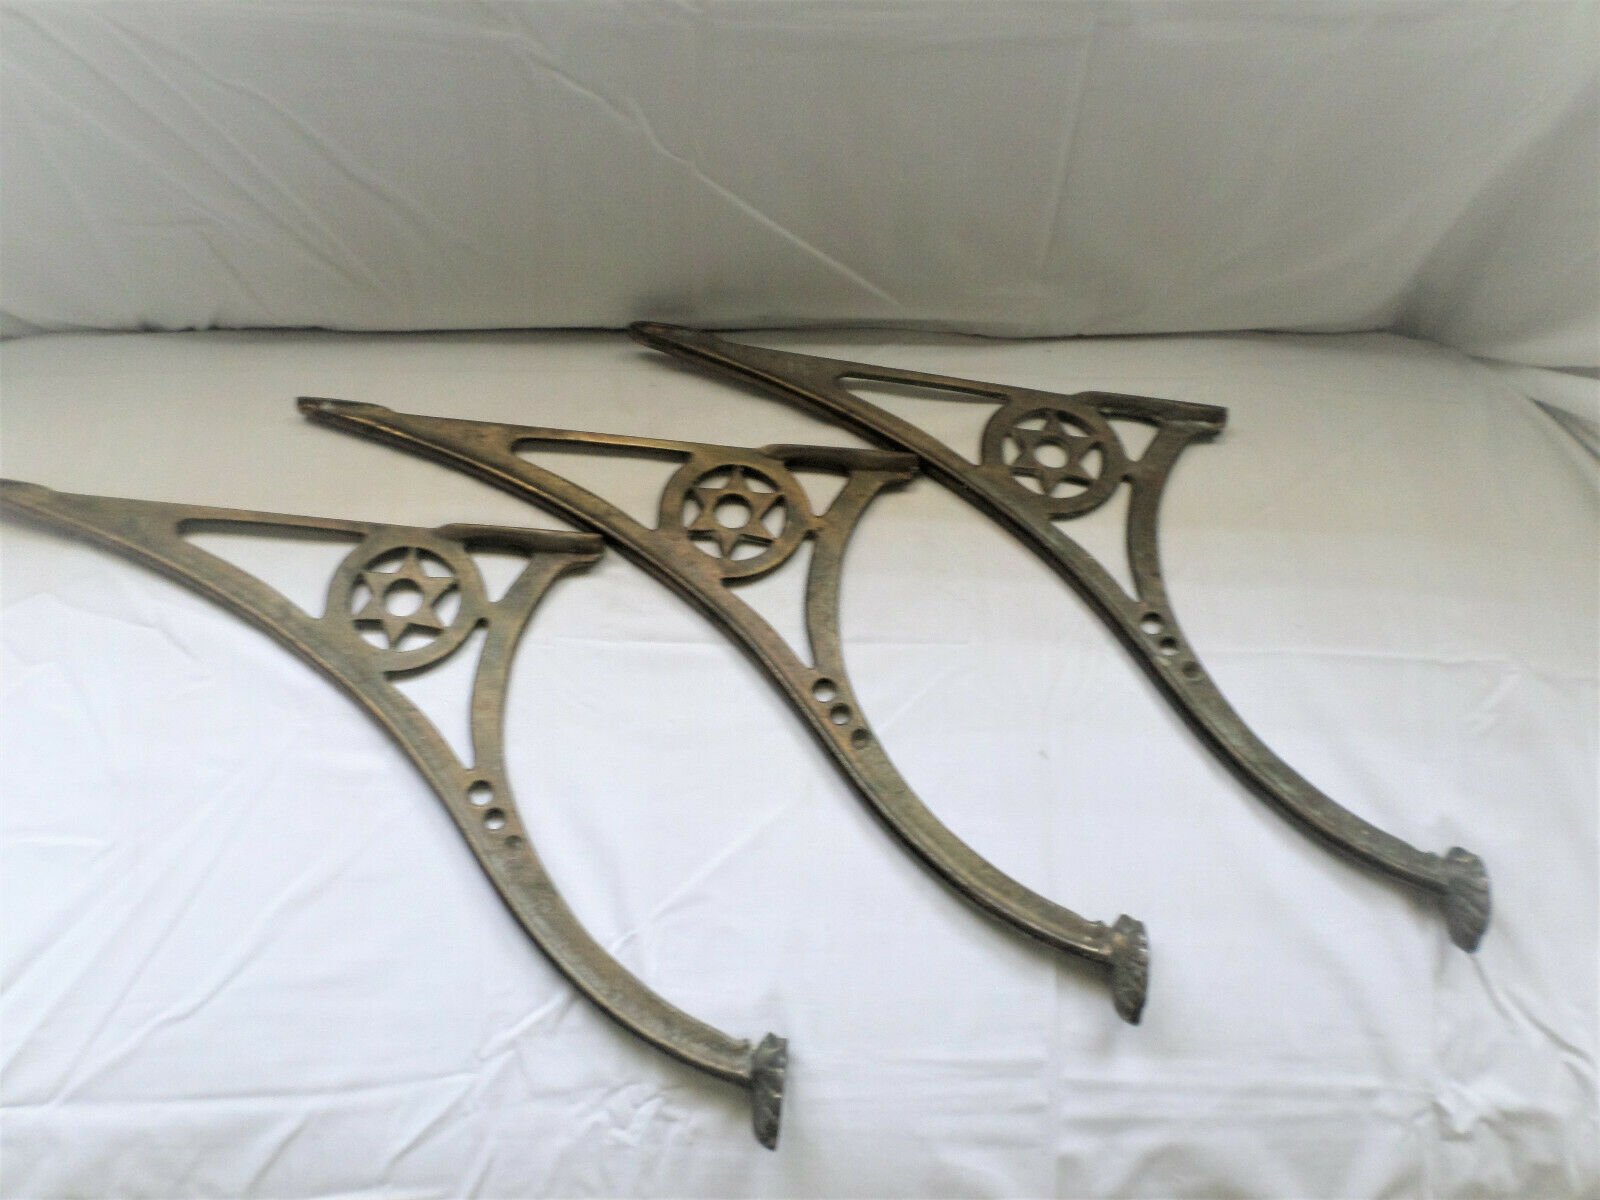 Steampunk Set Of 3 Cast Iron Table Legs With A Industrial Star Design